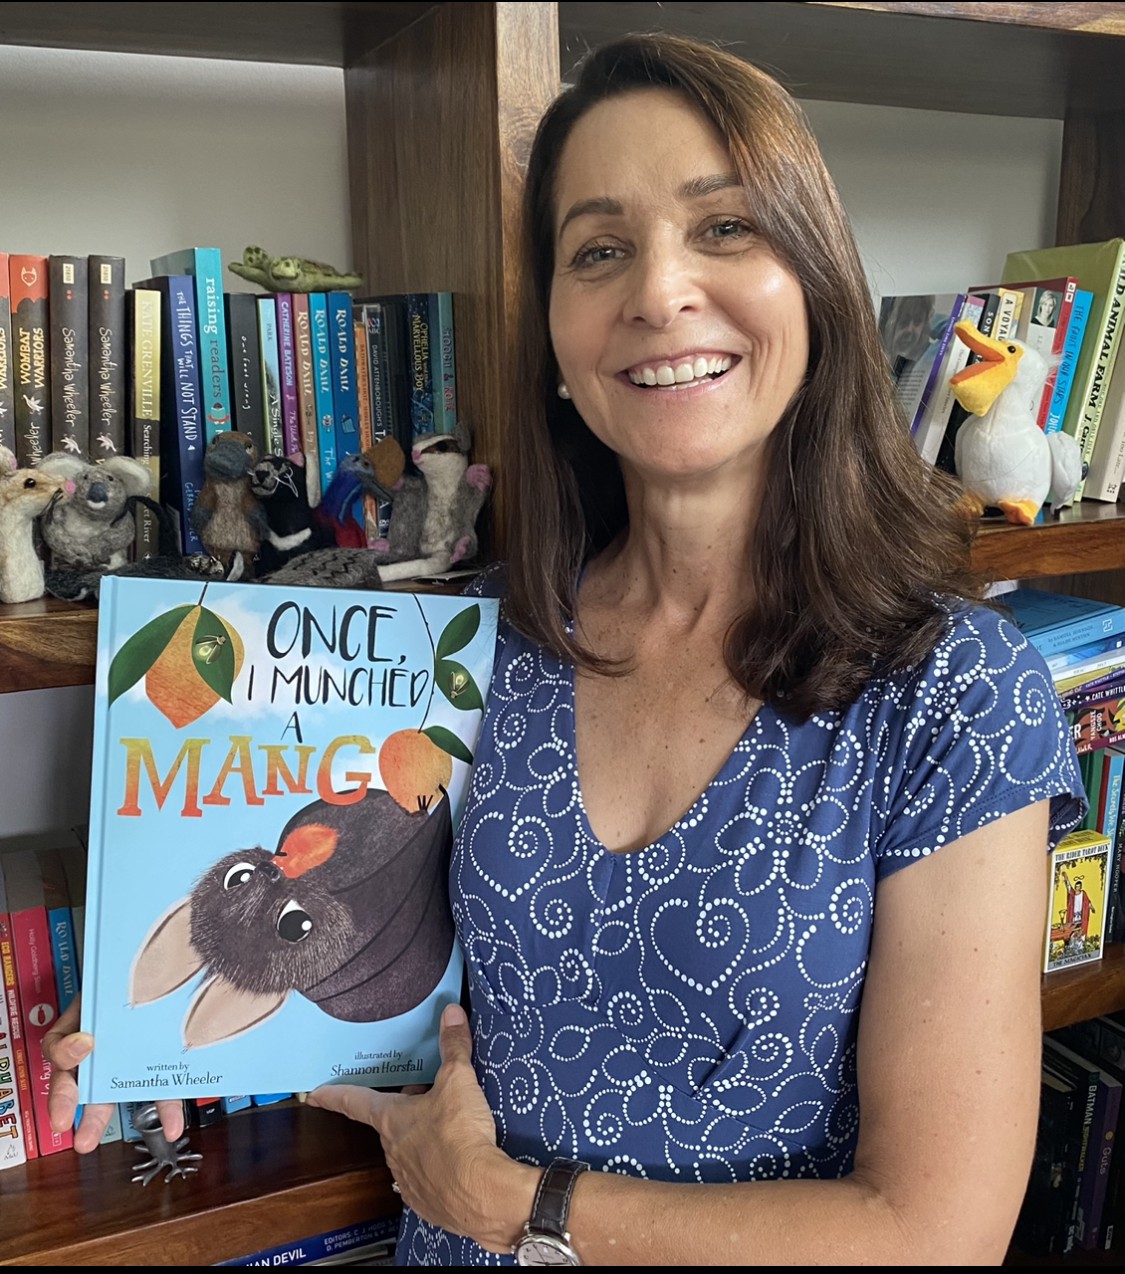 Samantha Wheeler smiles in front of a bookshelf she holds a copy of Once I Munched a Mango